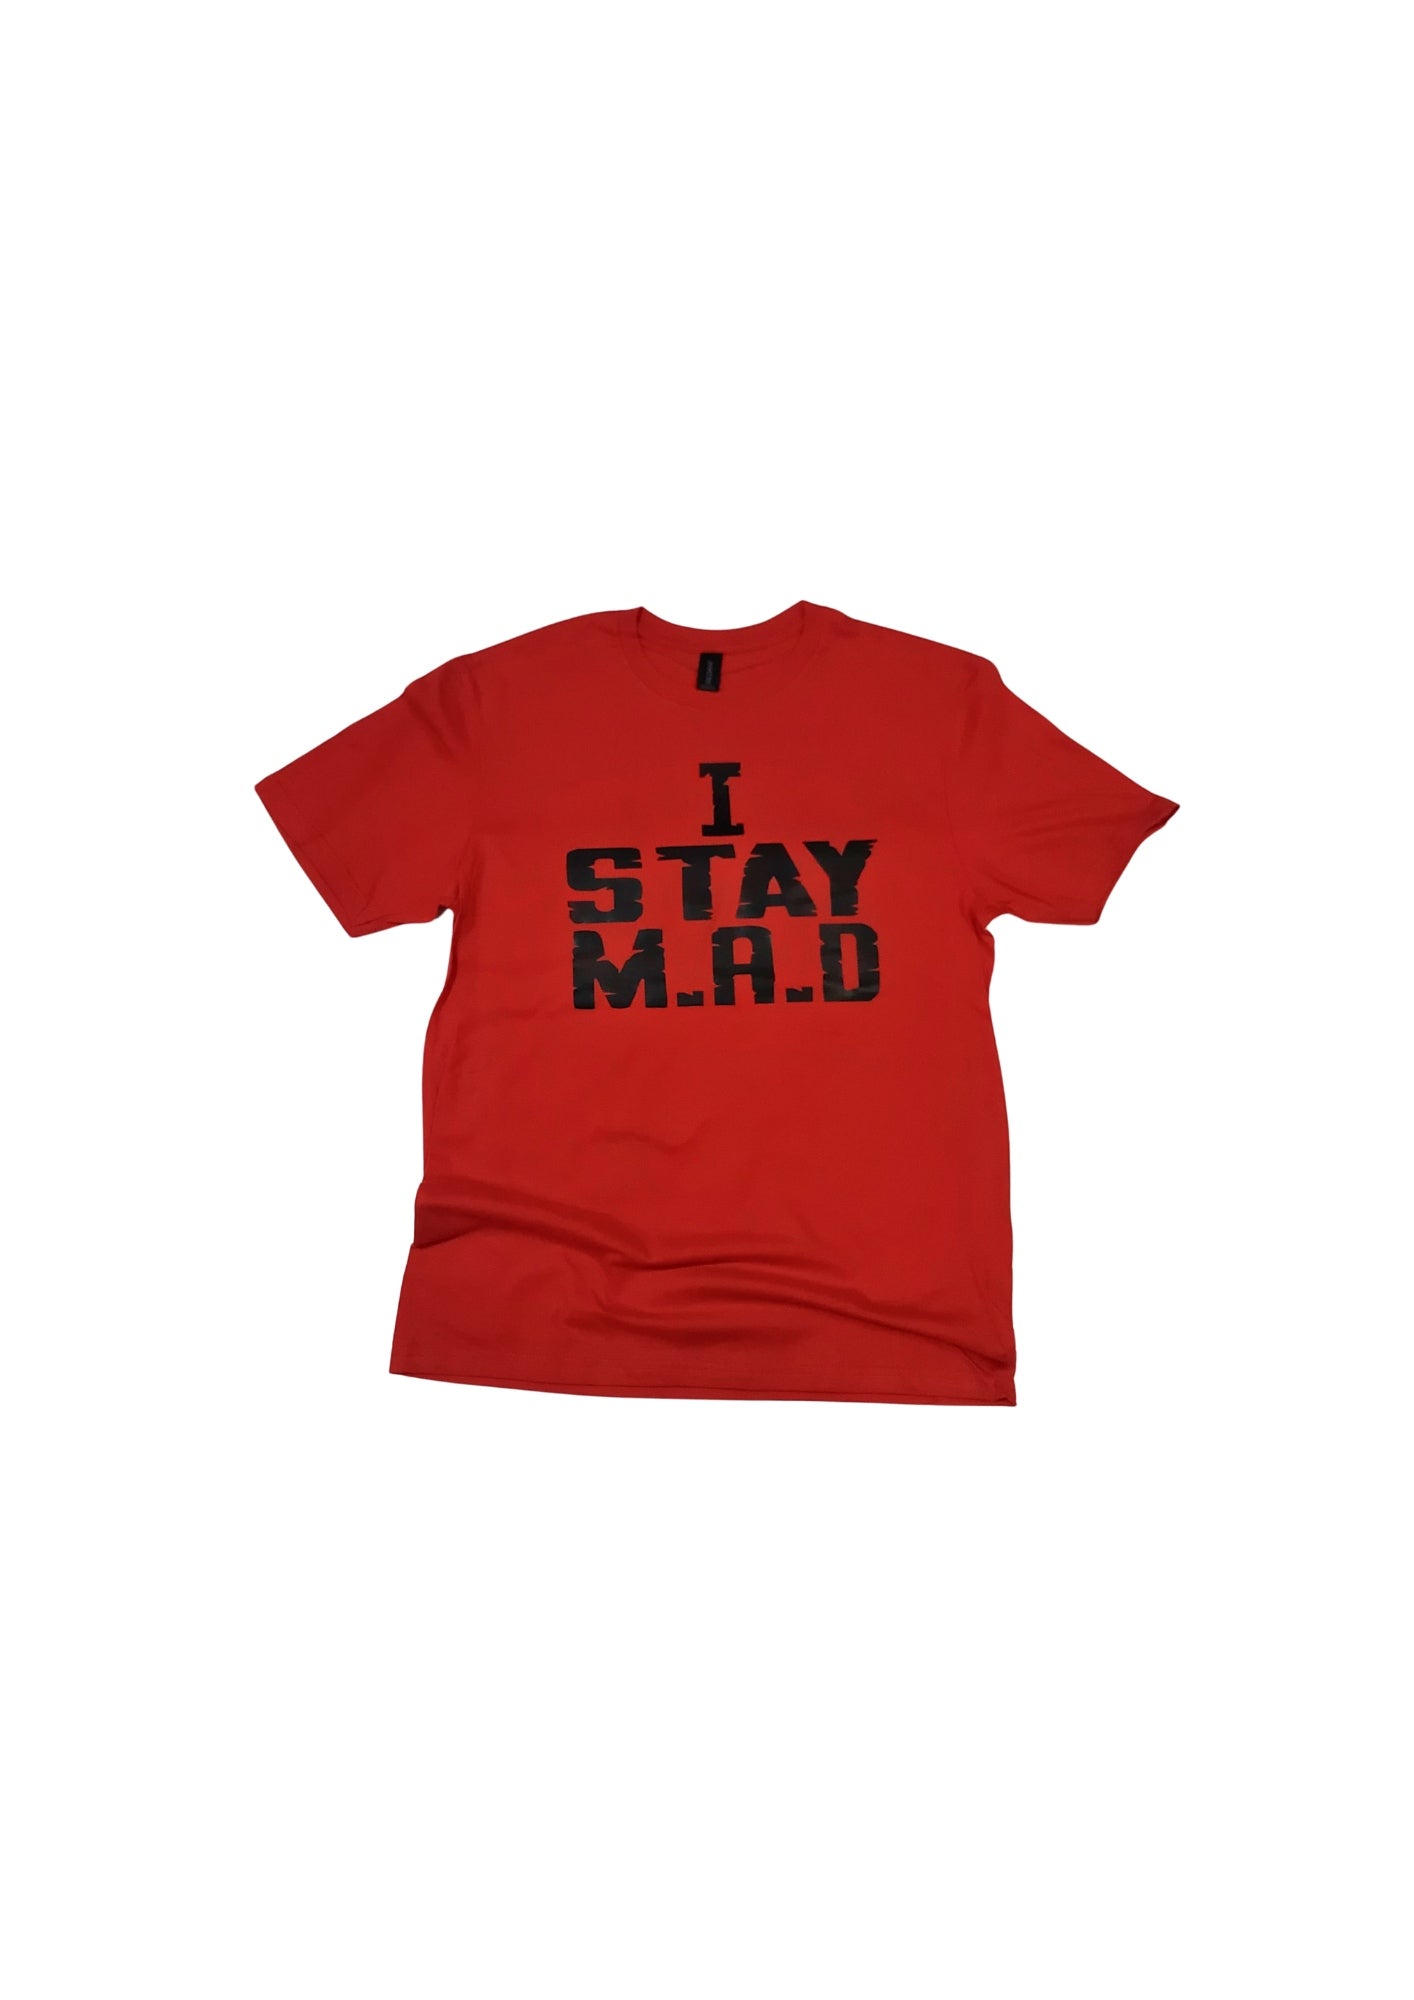 I Stay M.A.D. Tee Ruby